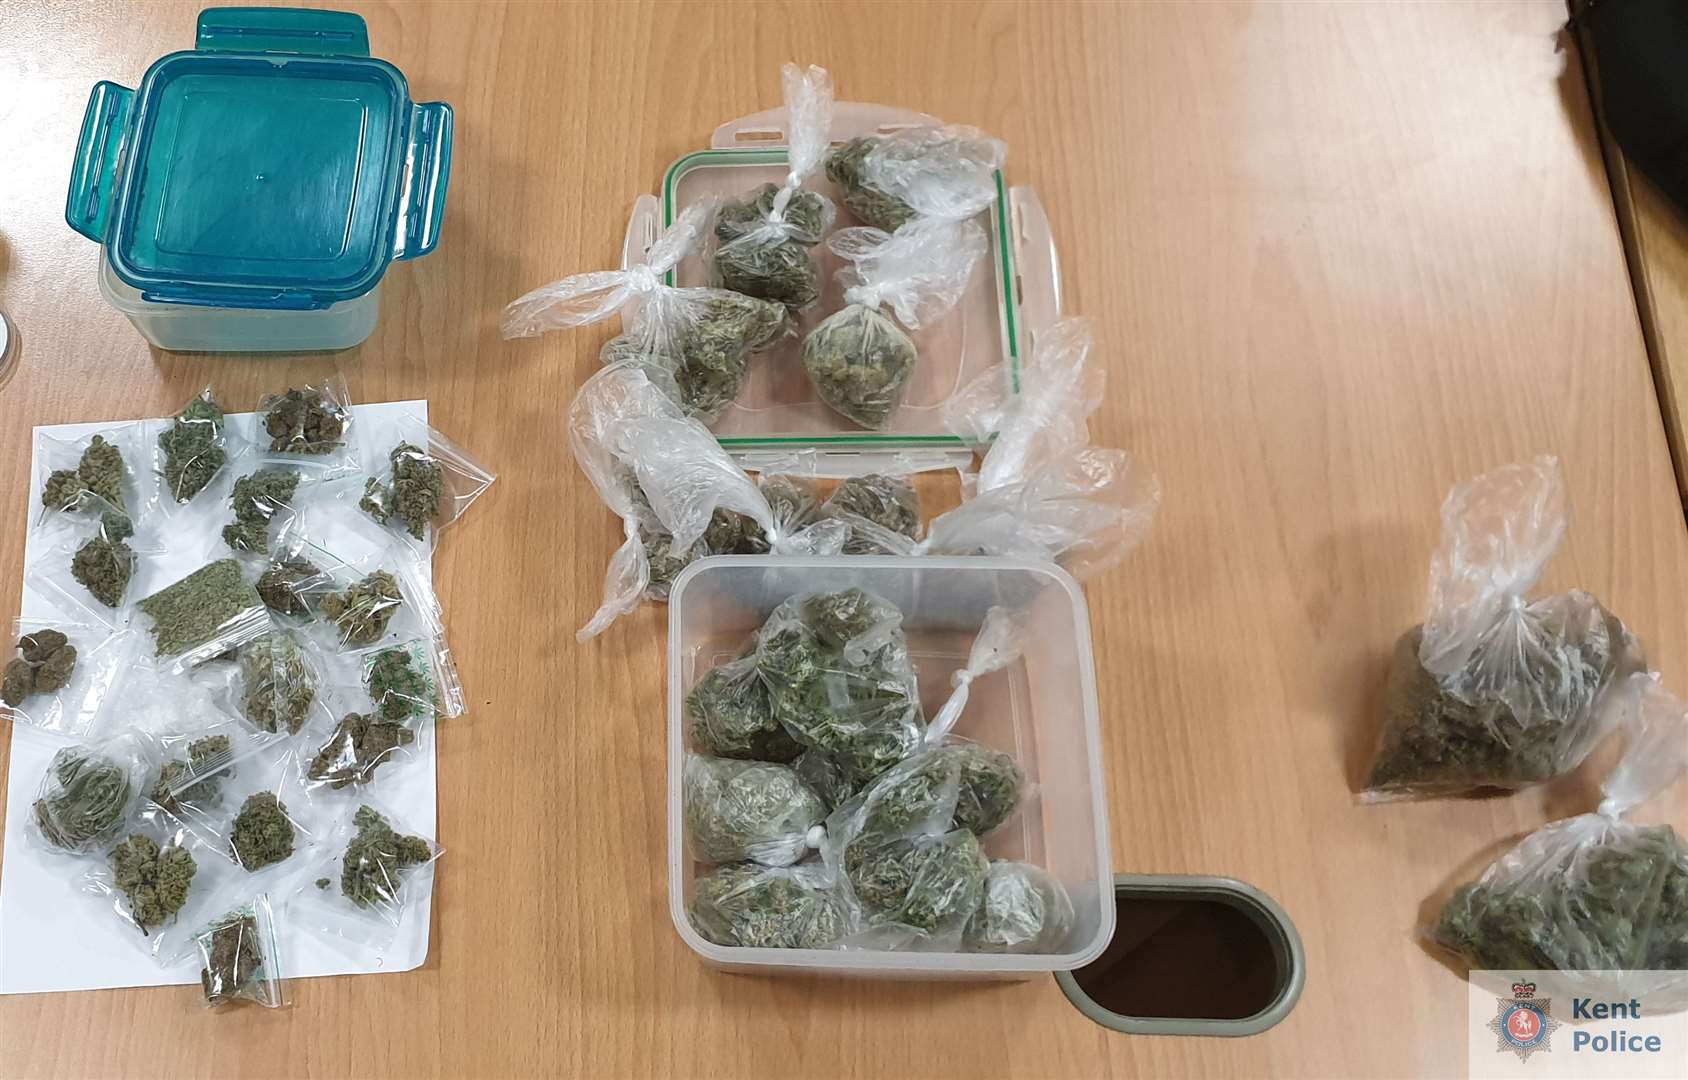 Drugs seized by the special constables (9083150)